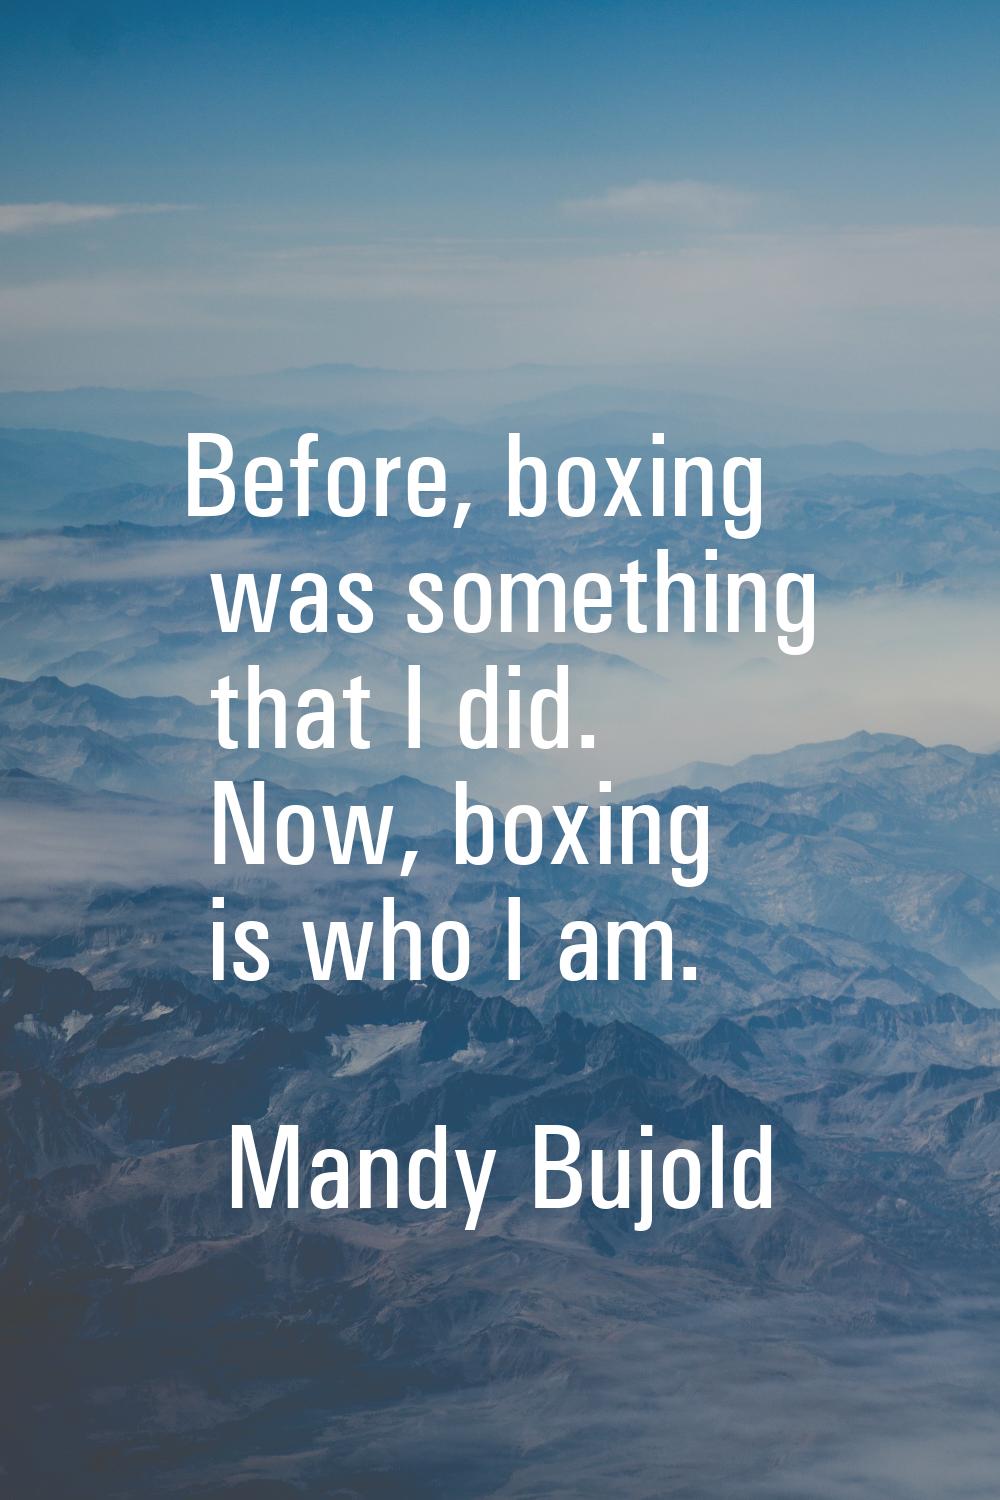 Before, boxing was something that I did. Now, boxing is who I am.